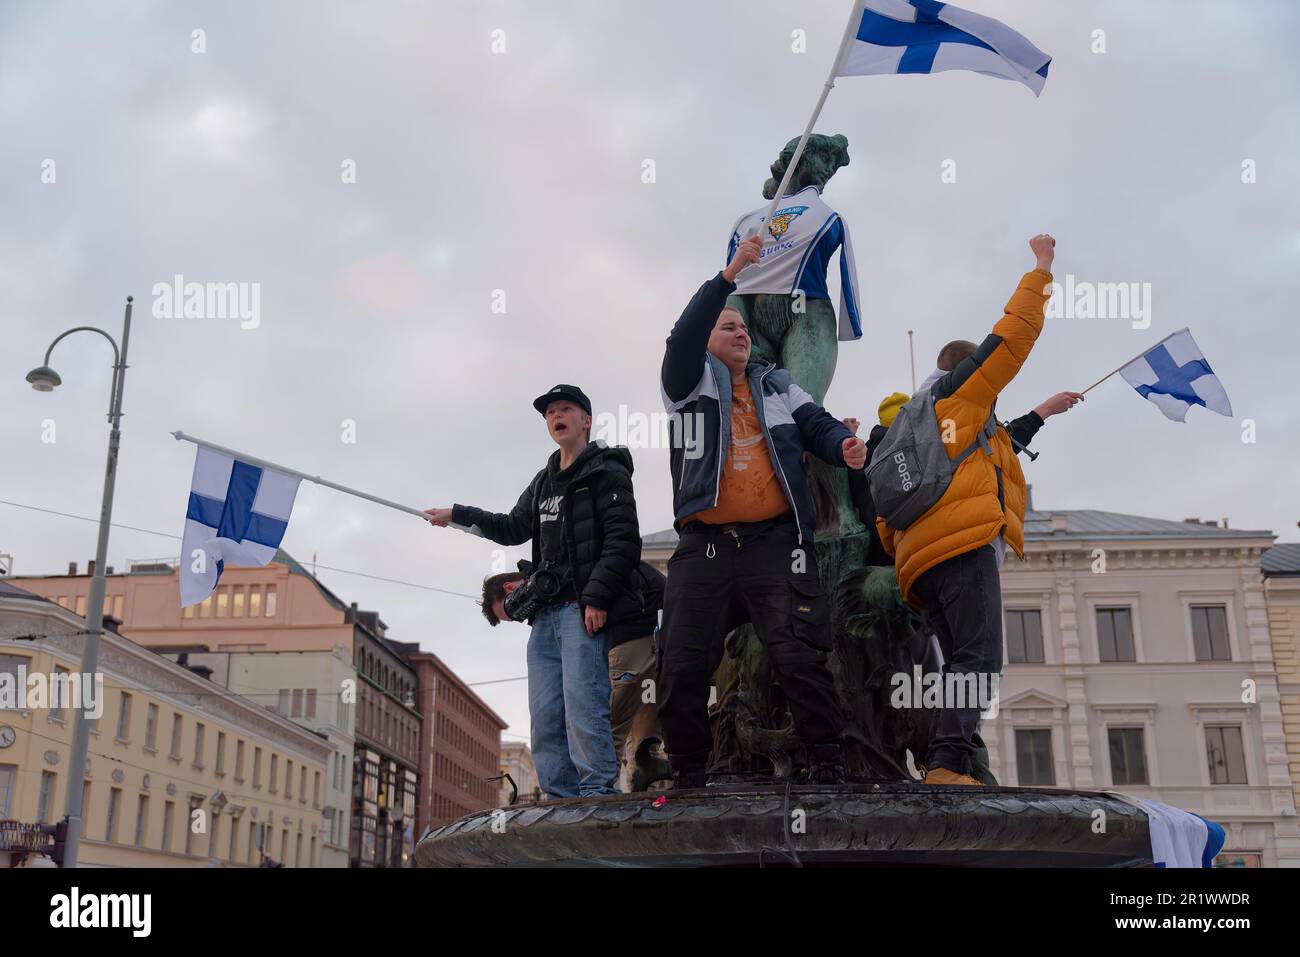 Helsinki, Finland - February 20, 2022: Finnish ice hockey fans celebrate Finland’s first-ever olympic gold medal in ice hockey in Peking 2022 olympics Stock Photo